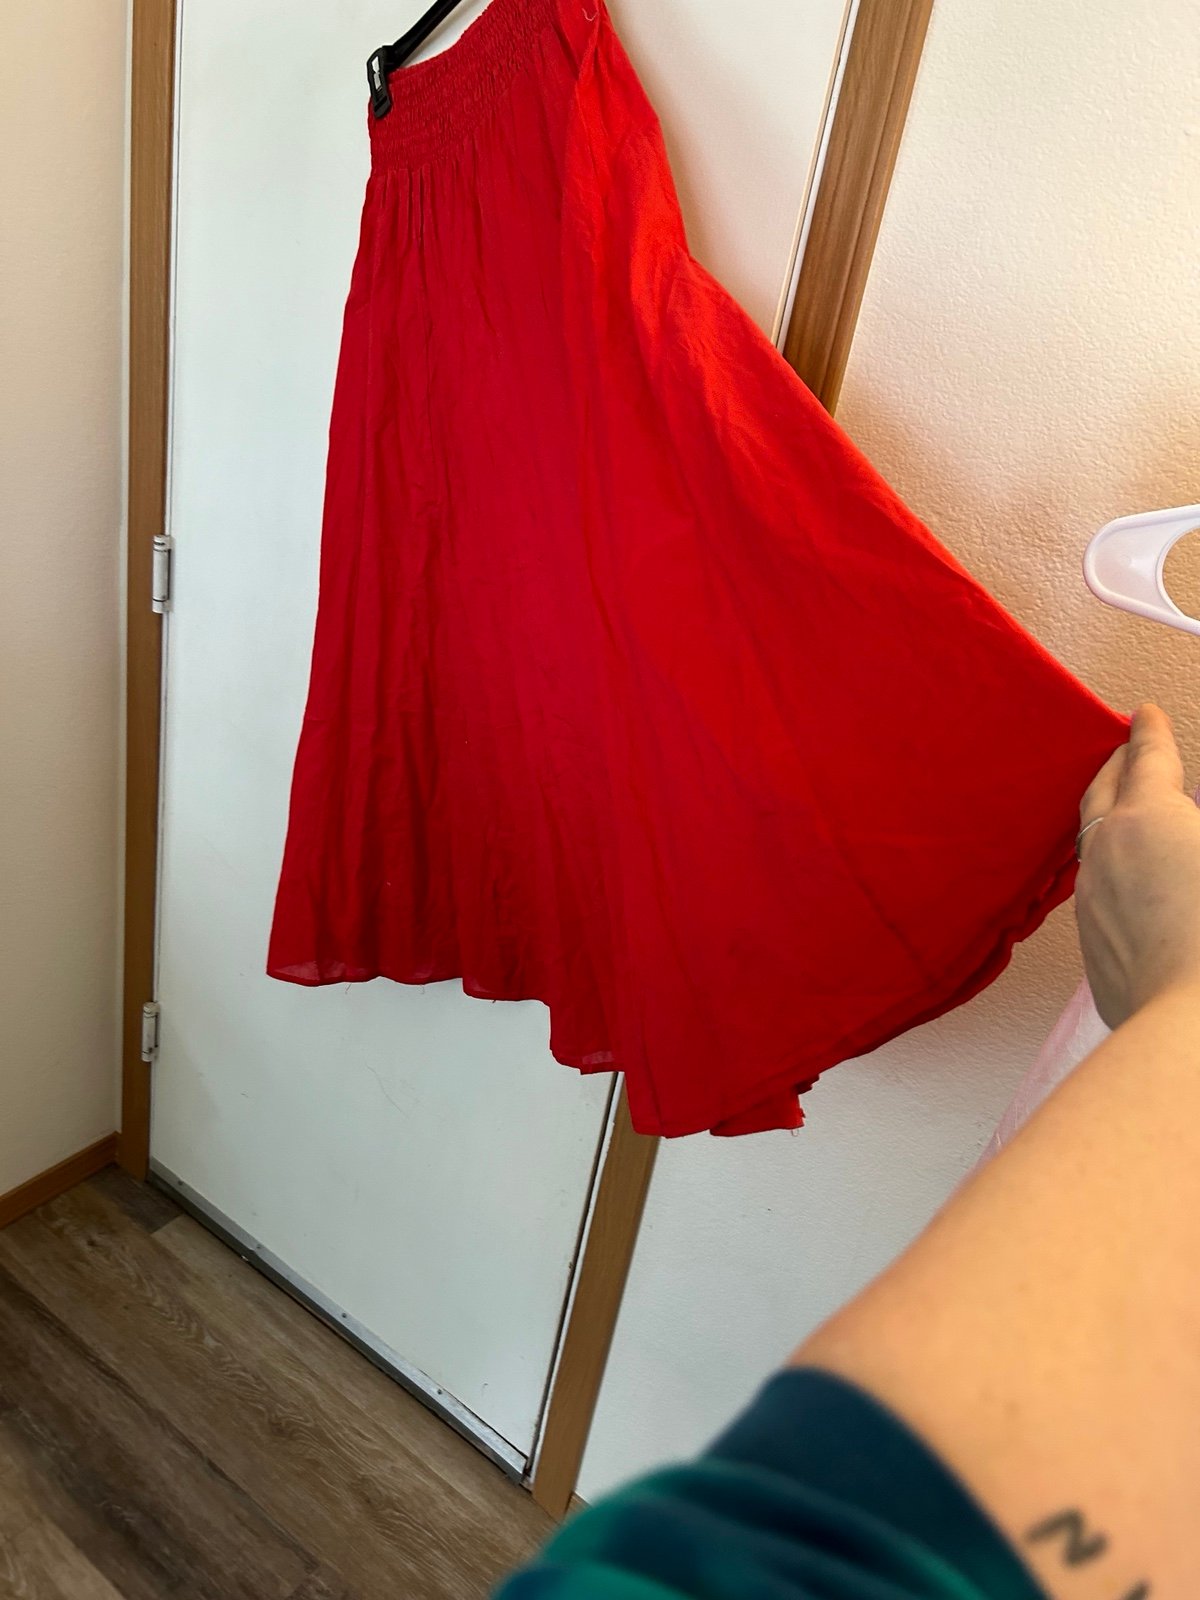 reasonable price NWT 100% Cotton Red stretch waist pull on maxi skirt pHUaPXZG5 hot sale